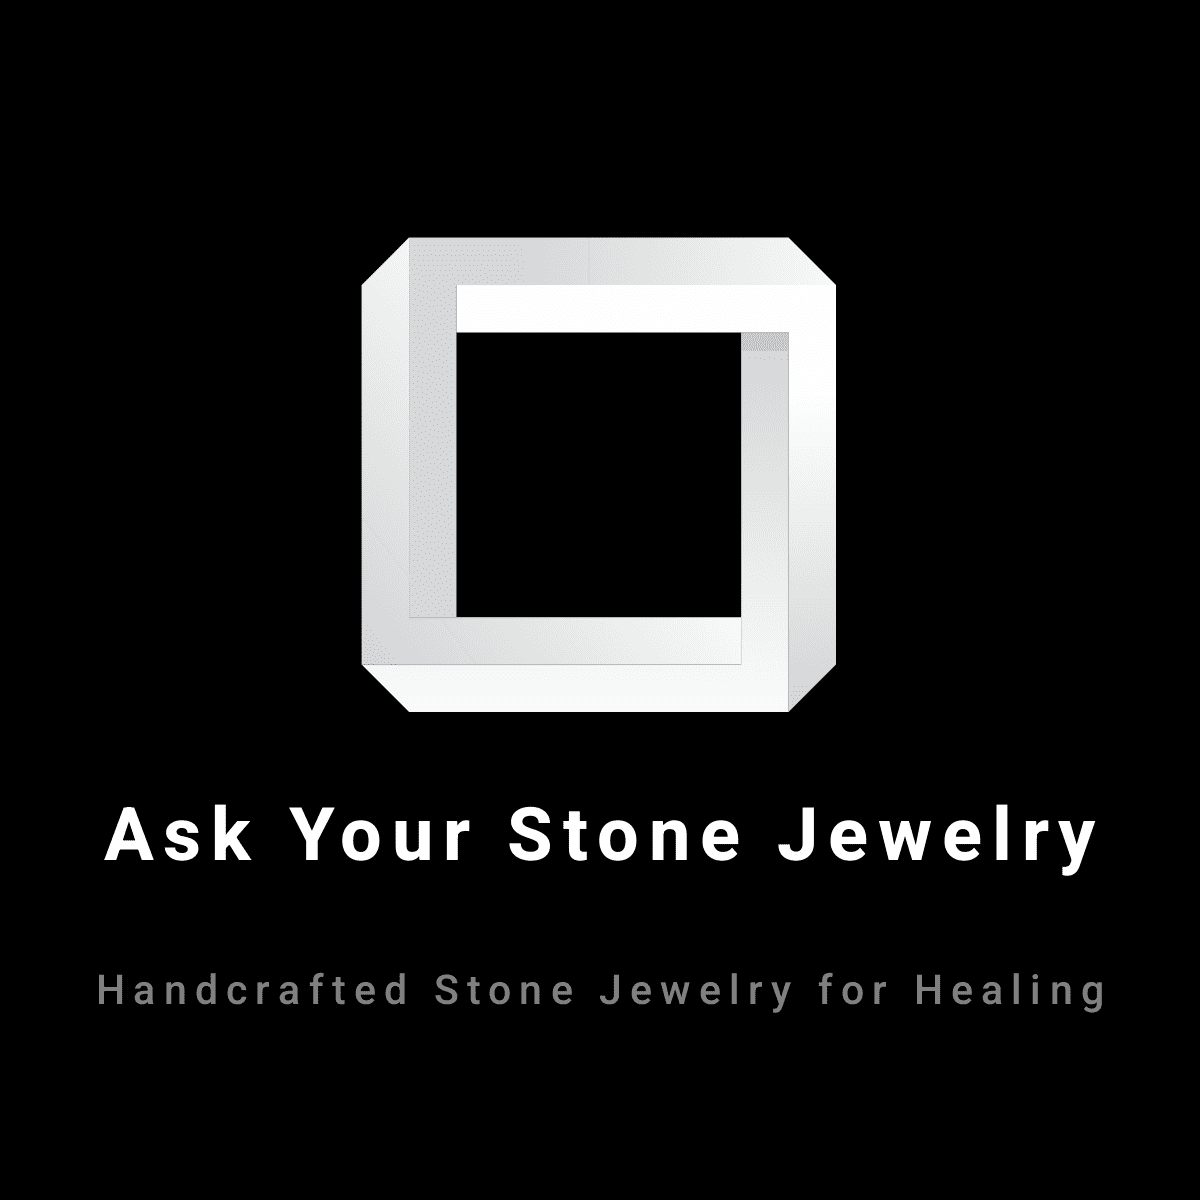 Ask Your Stone Jewelry